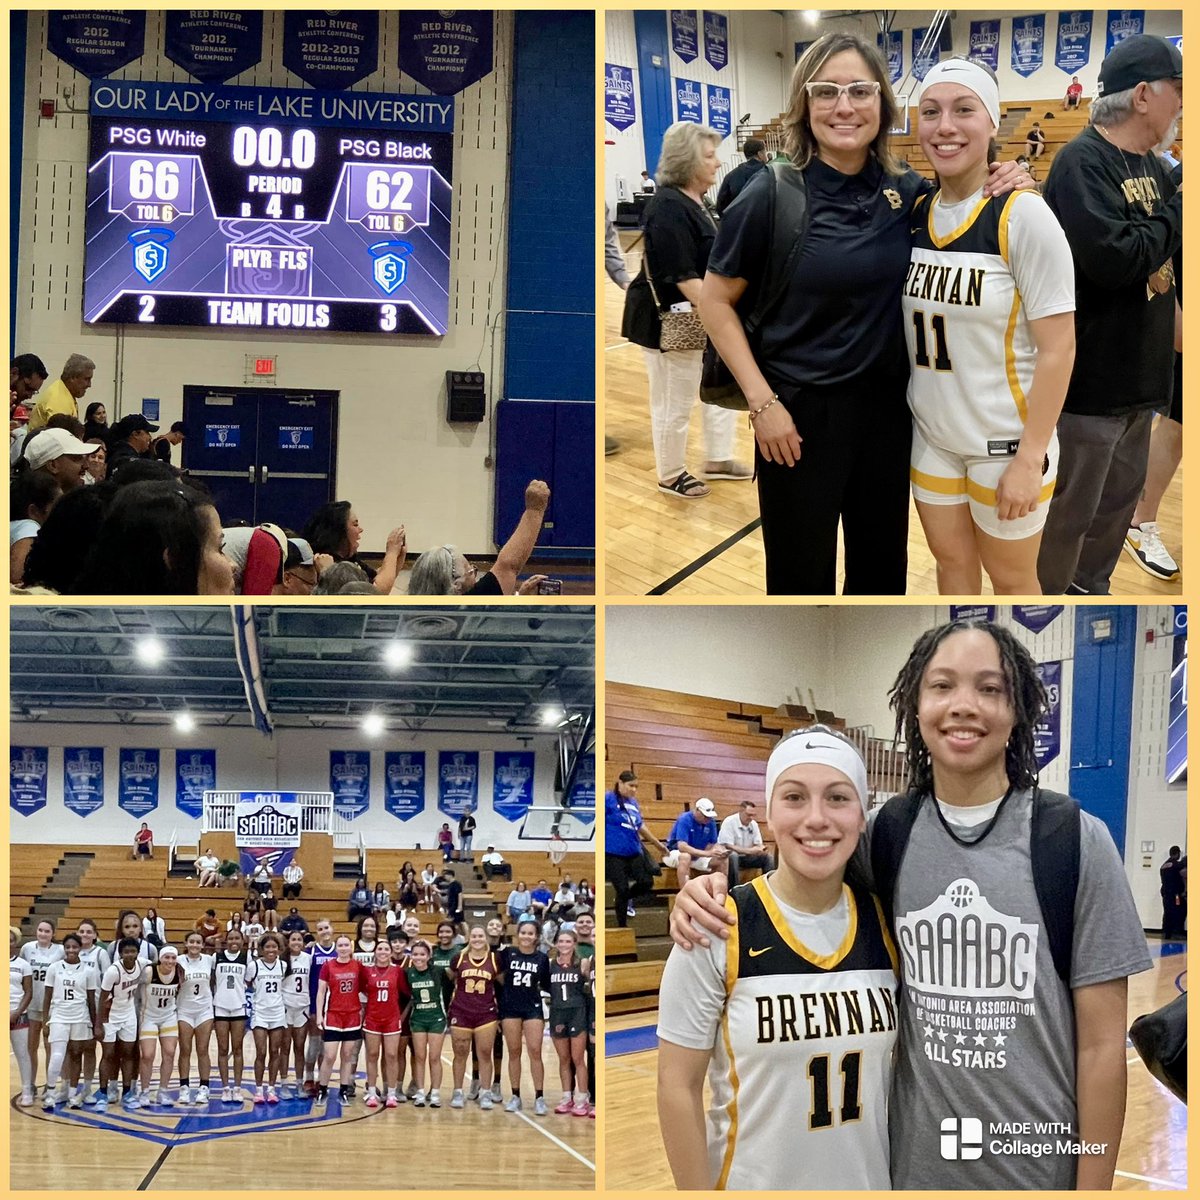 Team Contreras with the WIN in the 2024 SAAABC All-Star game today!!!! Super proud of our Coach, this team and especially @TyraSotelo_ and @TaytayR33 for representing Brennan High School and women’s basketball. This game did not disappoint, blessings to all with their future…